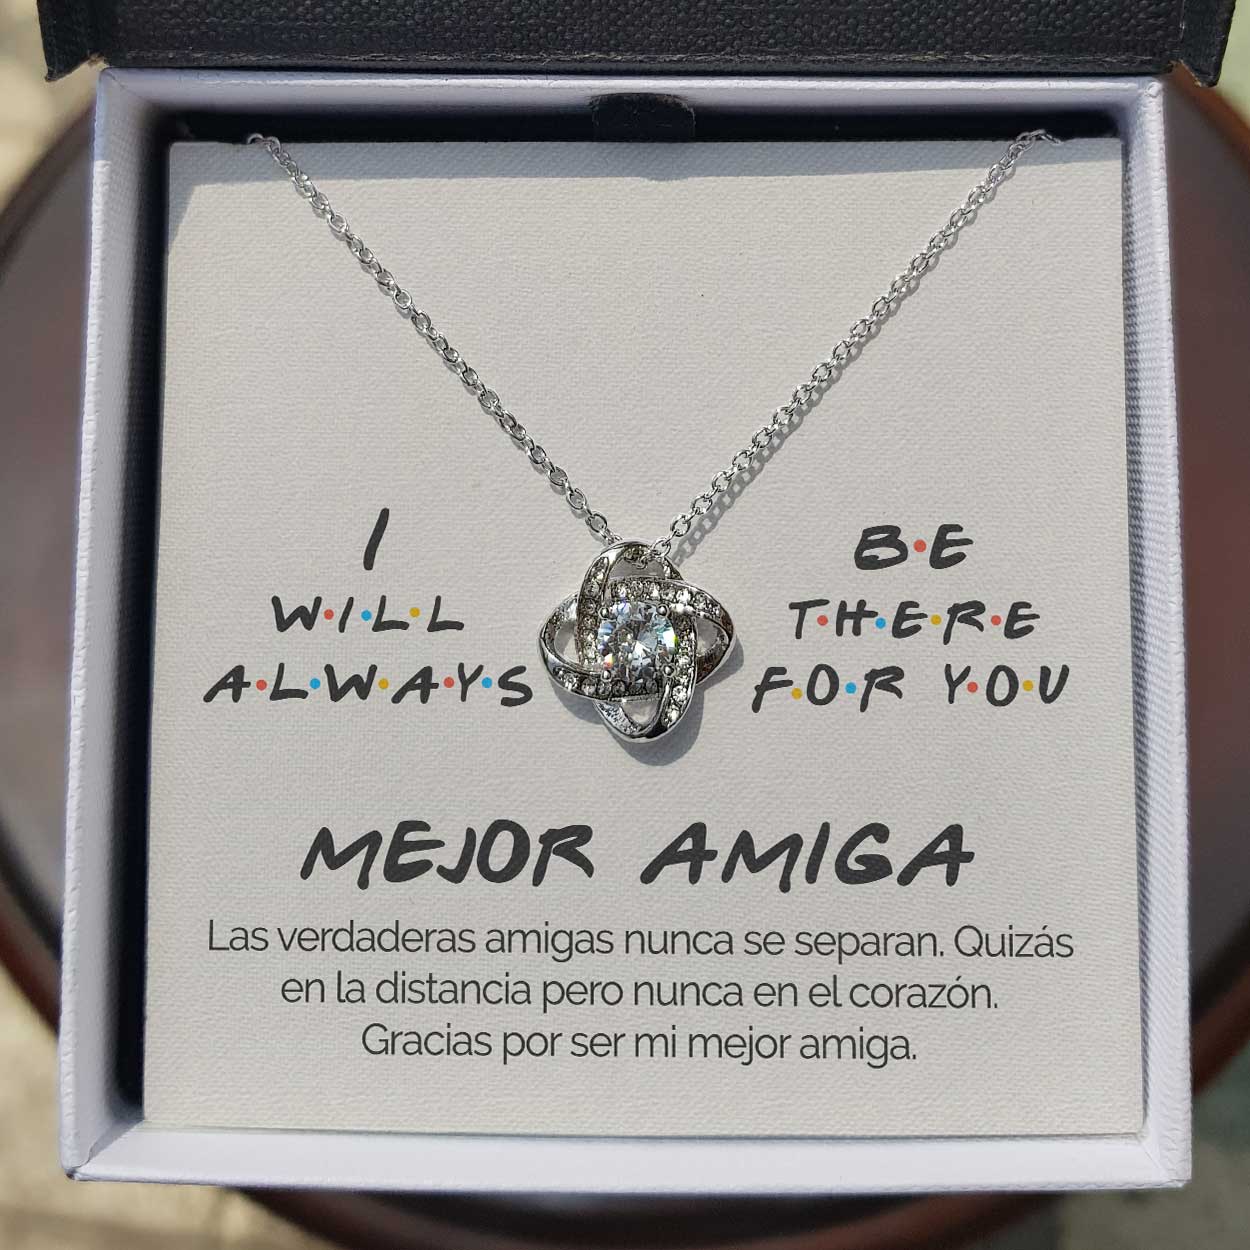 ShineOn Fulfillment Message Cards Standard Box Mejor Amiga - I Will Always Be There For You - Collar Lazo de Amor